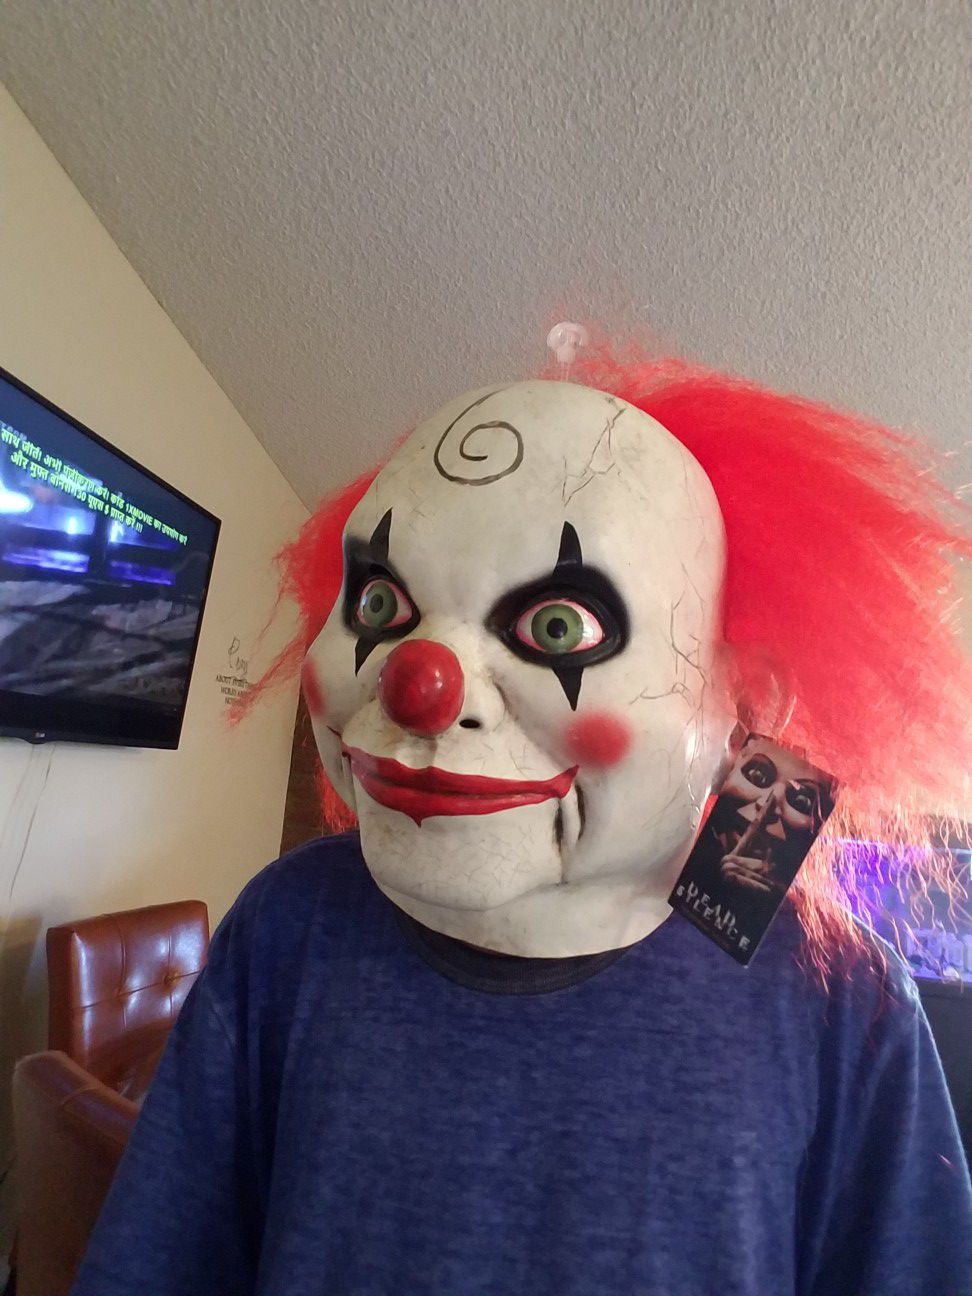 Scary clown mask holloween